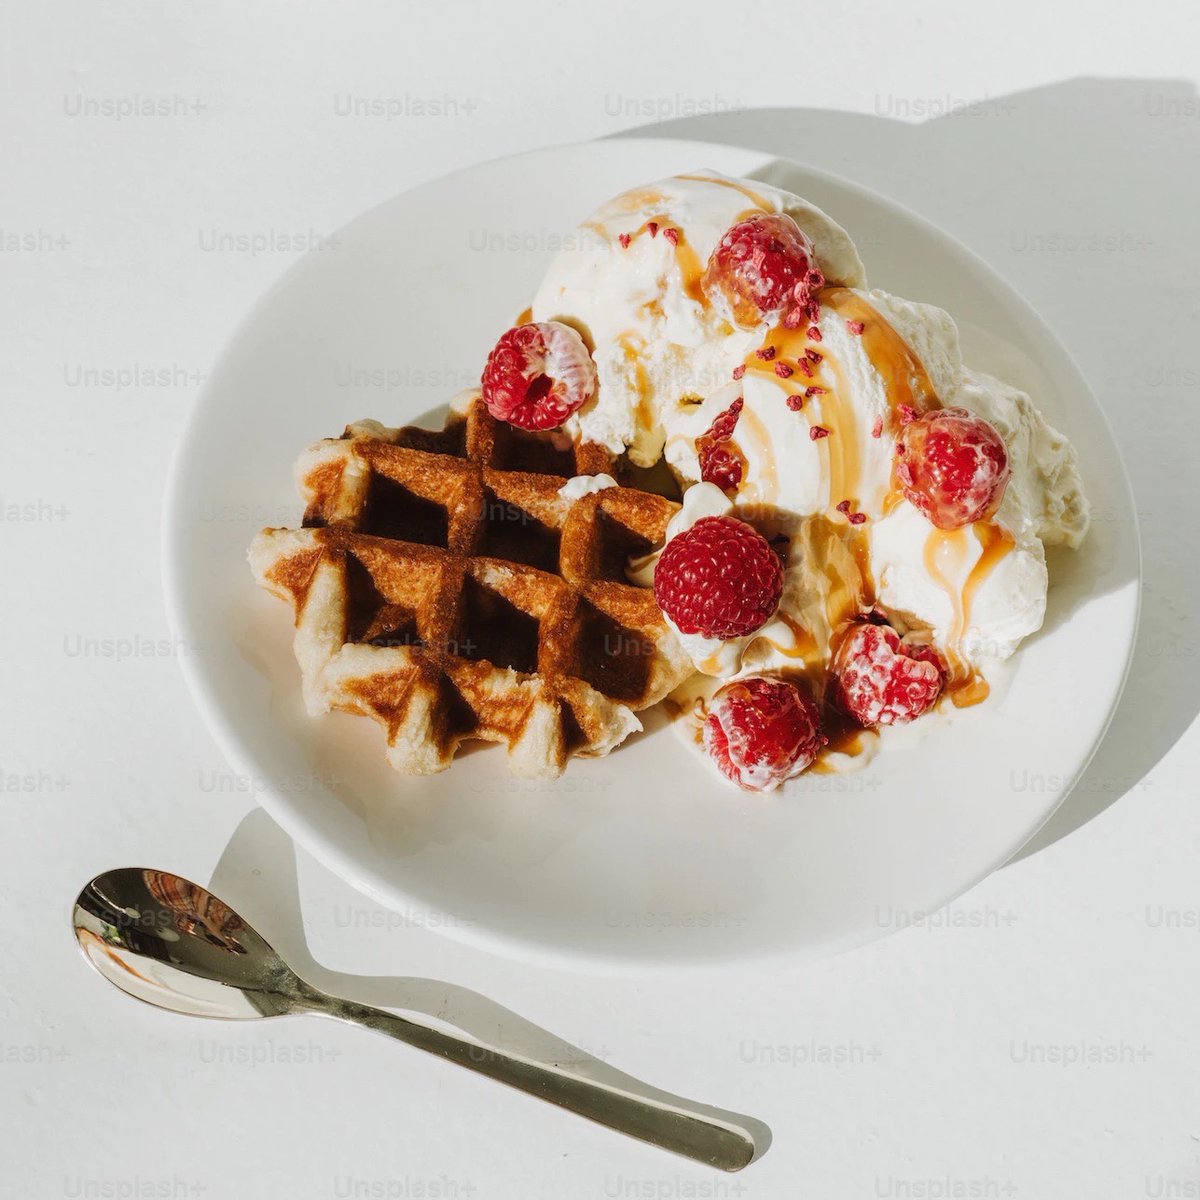 Start your day on a sweet note with our awesome spoons and 🍃 infused ice cream on top of waffles for breakfast! Check out this article that says it's actually a good idea: chapmans.ca/scoop/study-ic… #TastyTuesday #IceCreamForBreakfast #CannabisIceCream